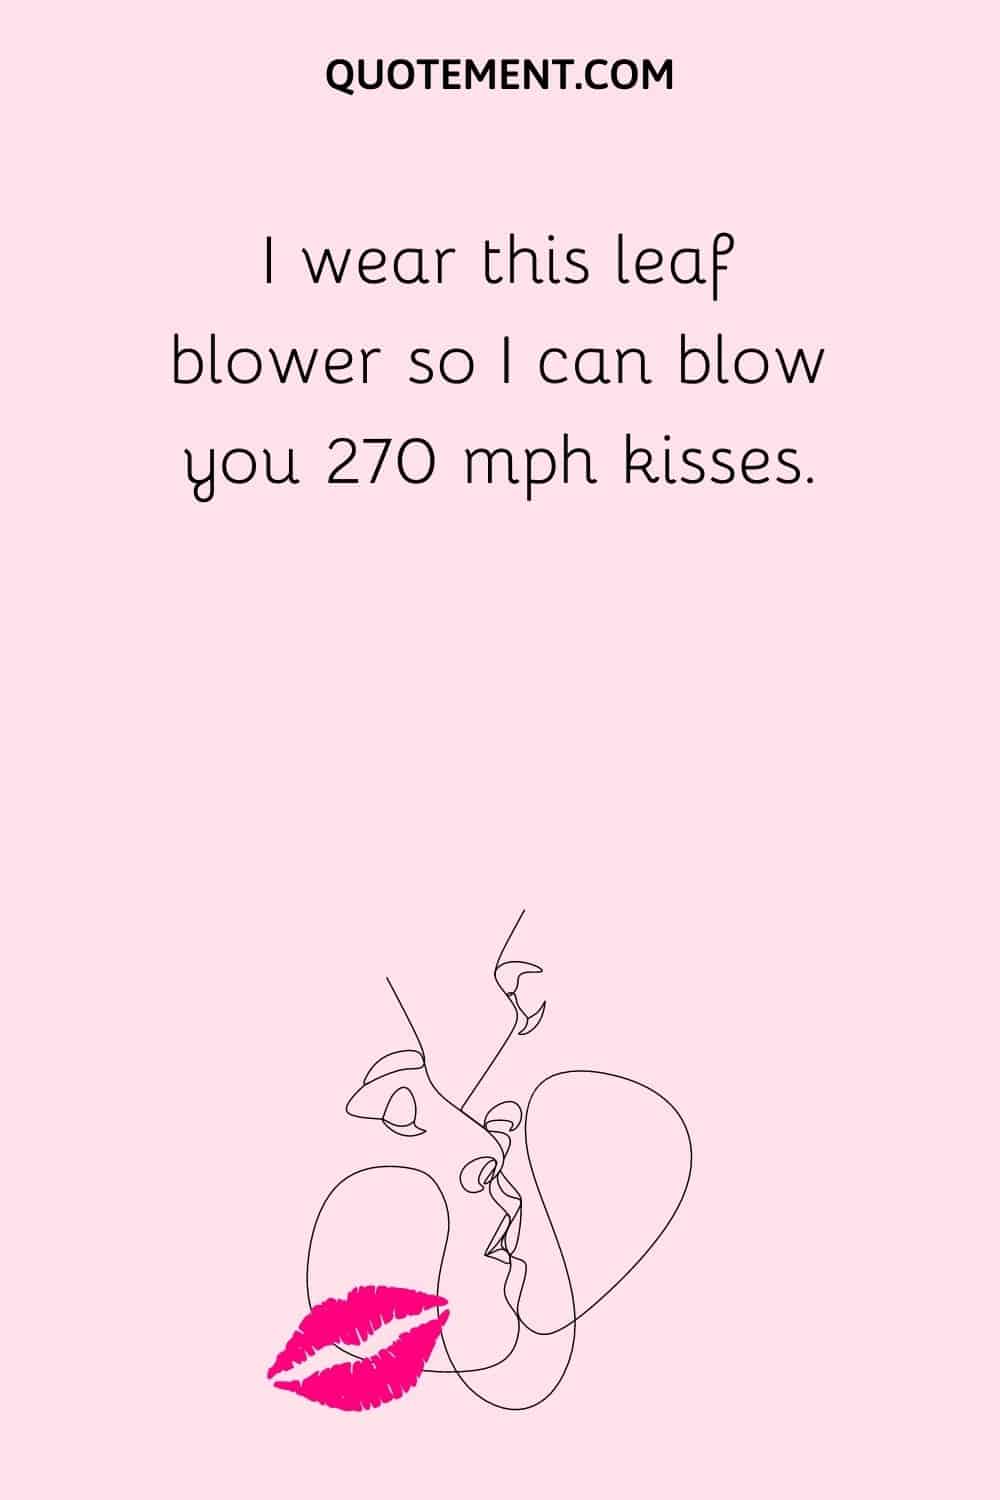 I wear this leaf blower so I can blow you 270 mph kisses